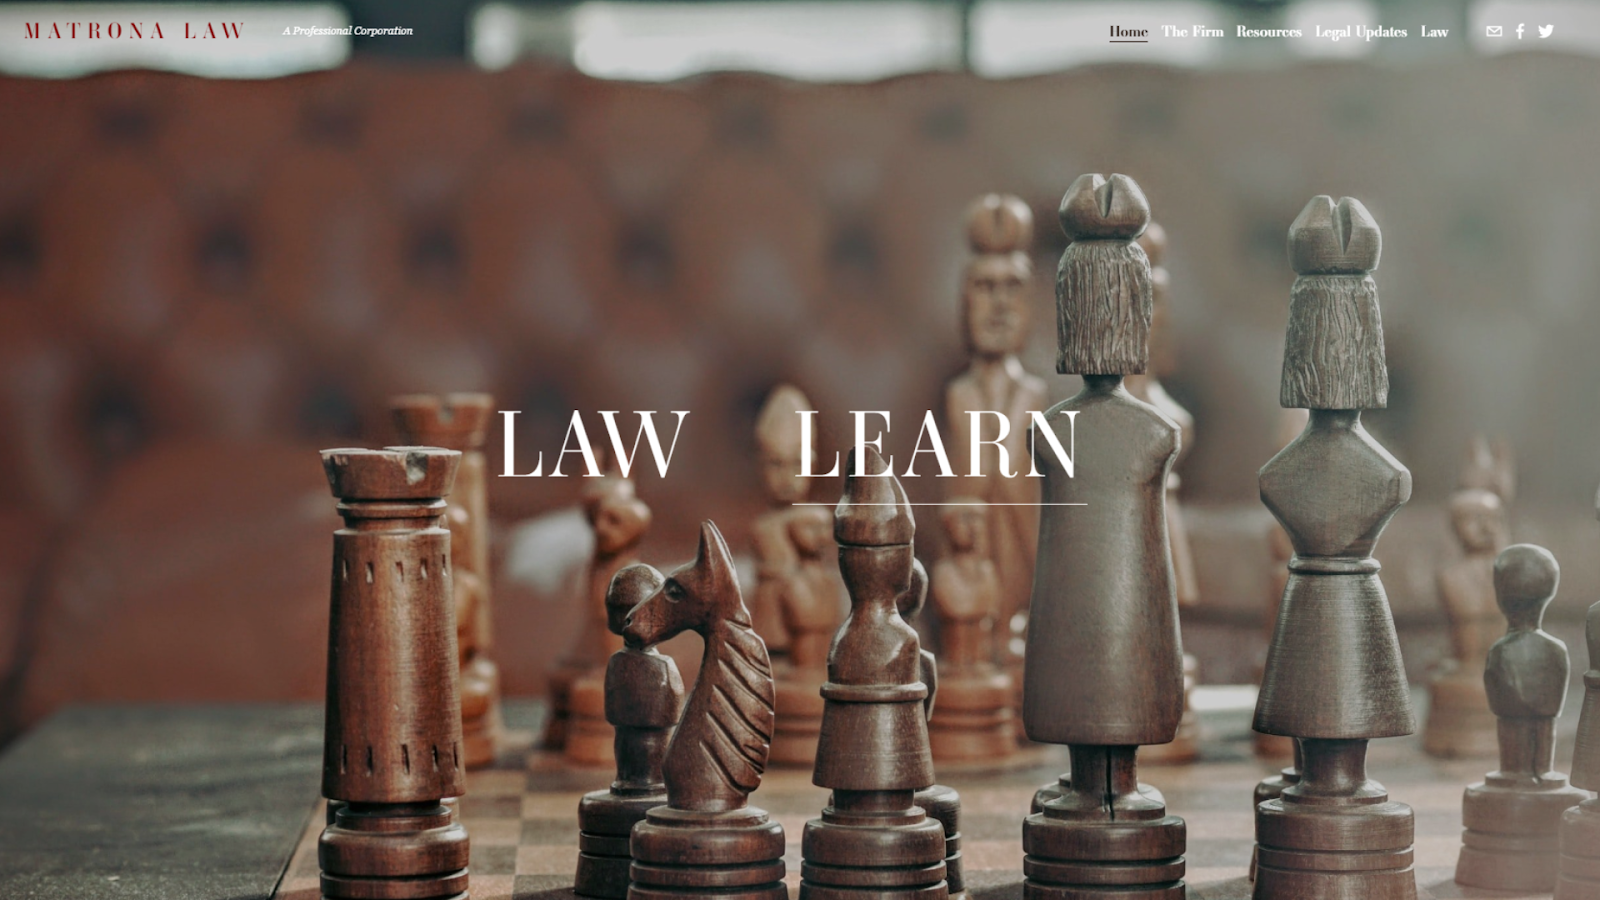 Screenshots from the Matrona Law website made with Squarespace